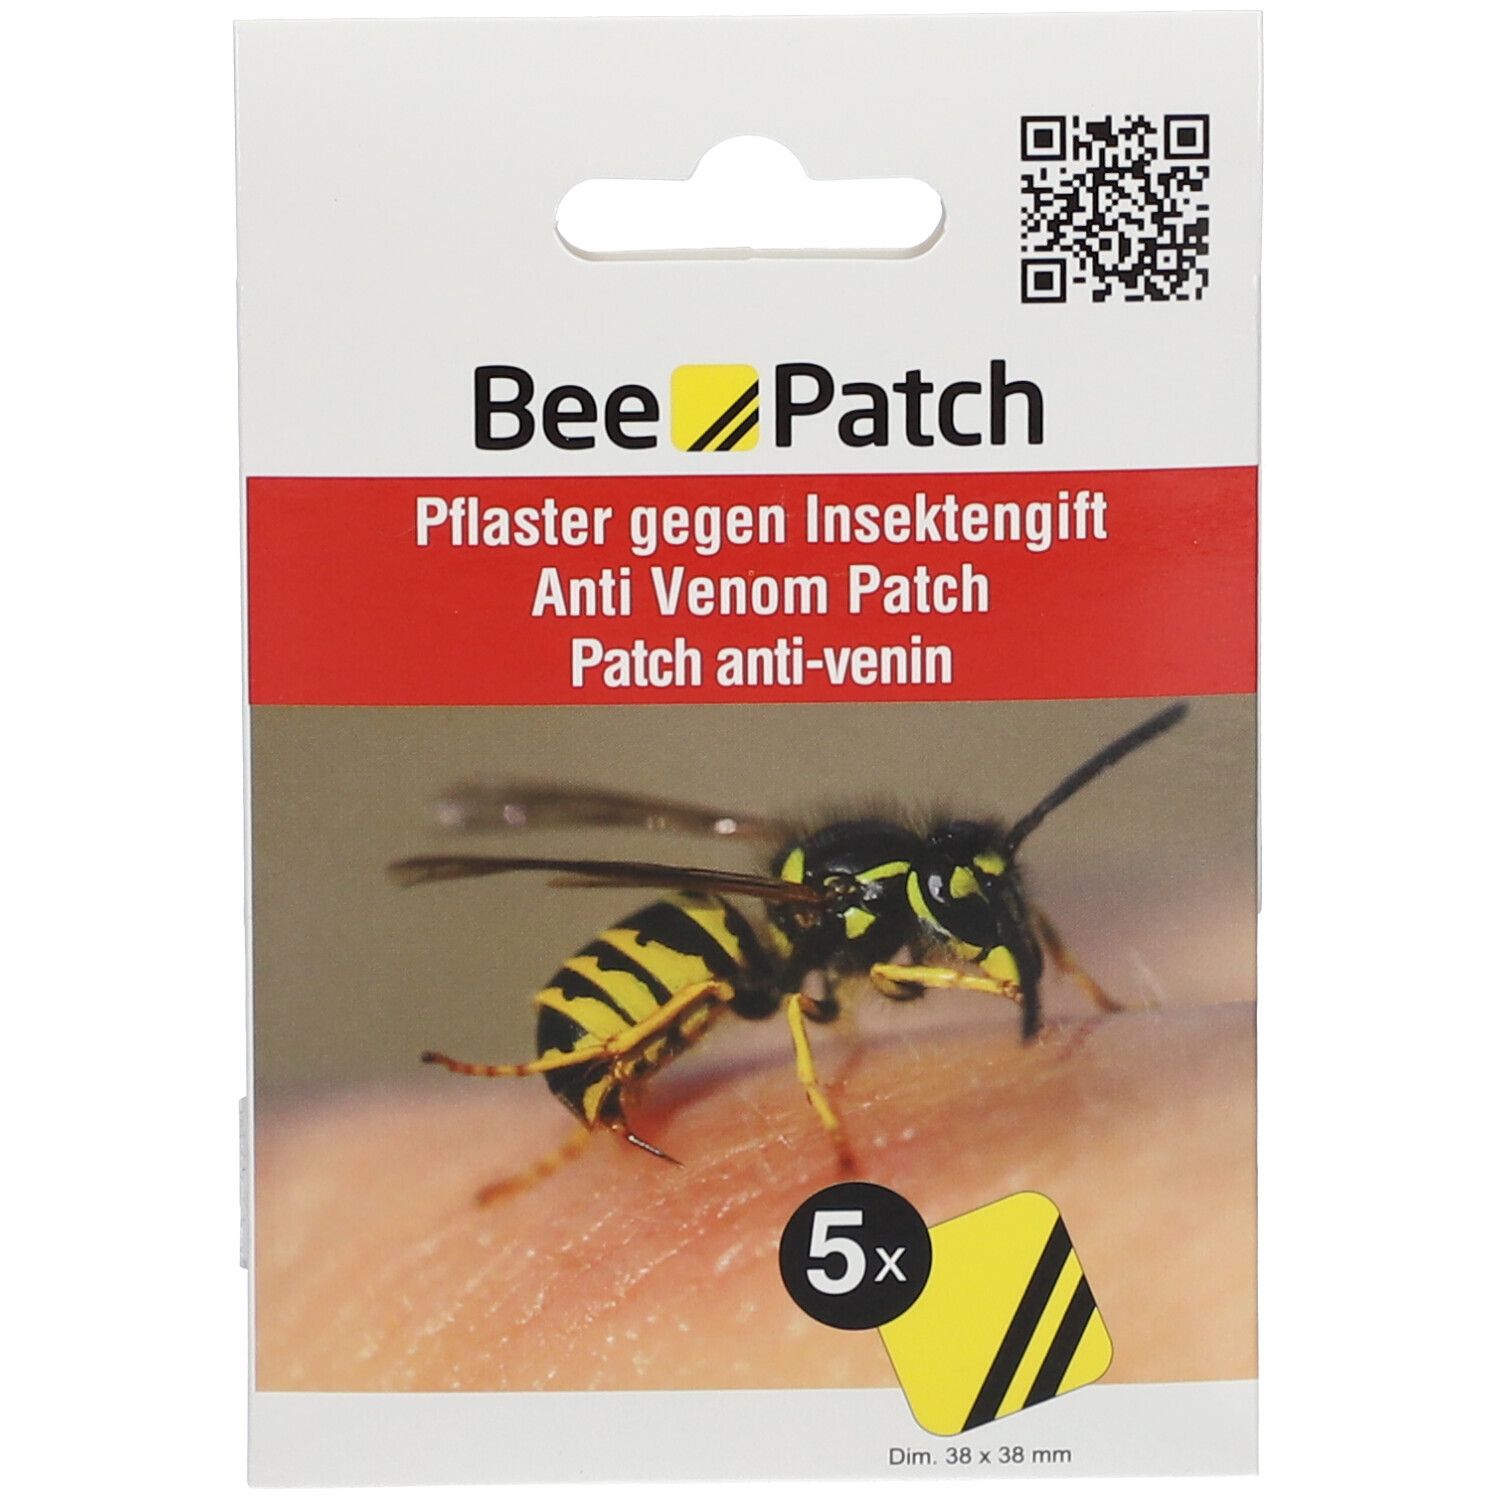 Bee Patch